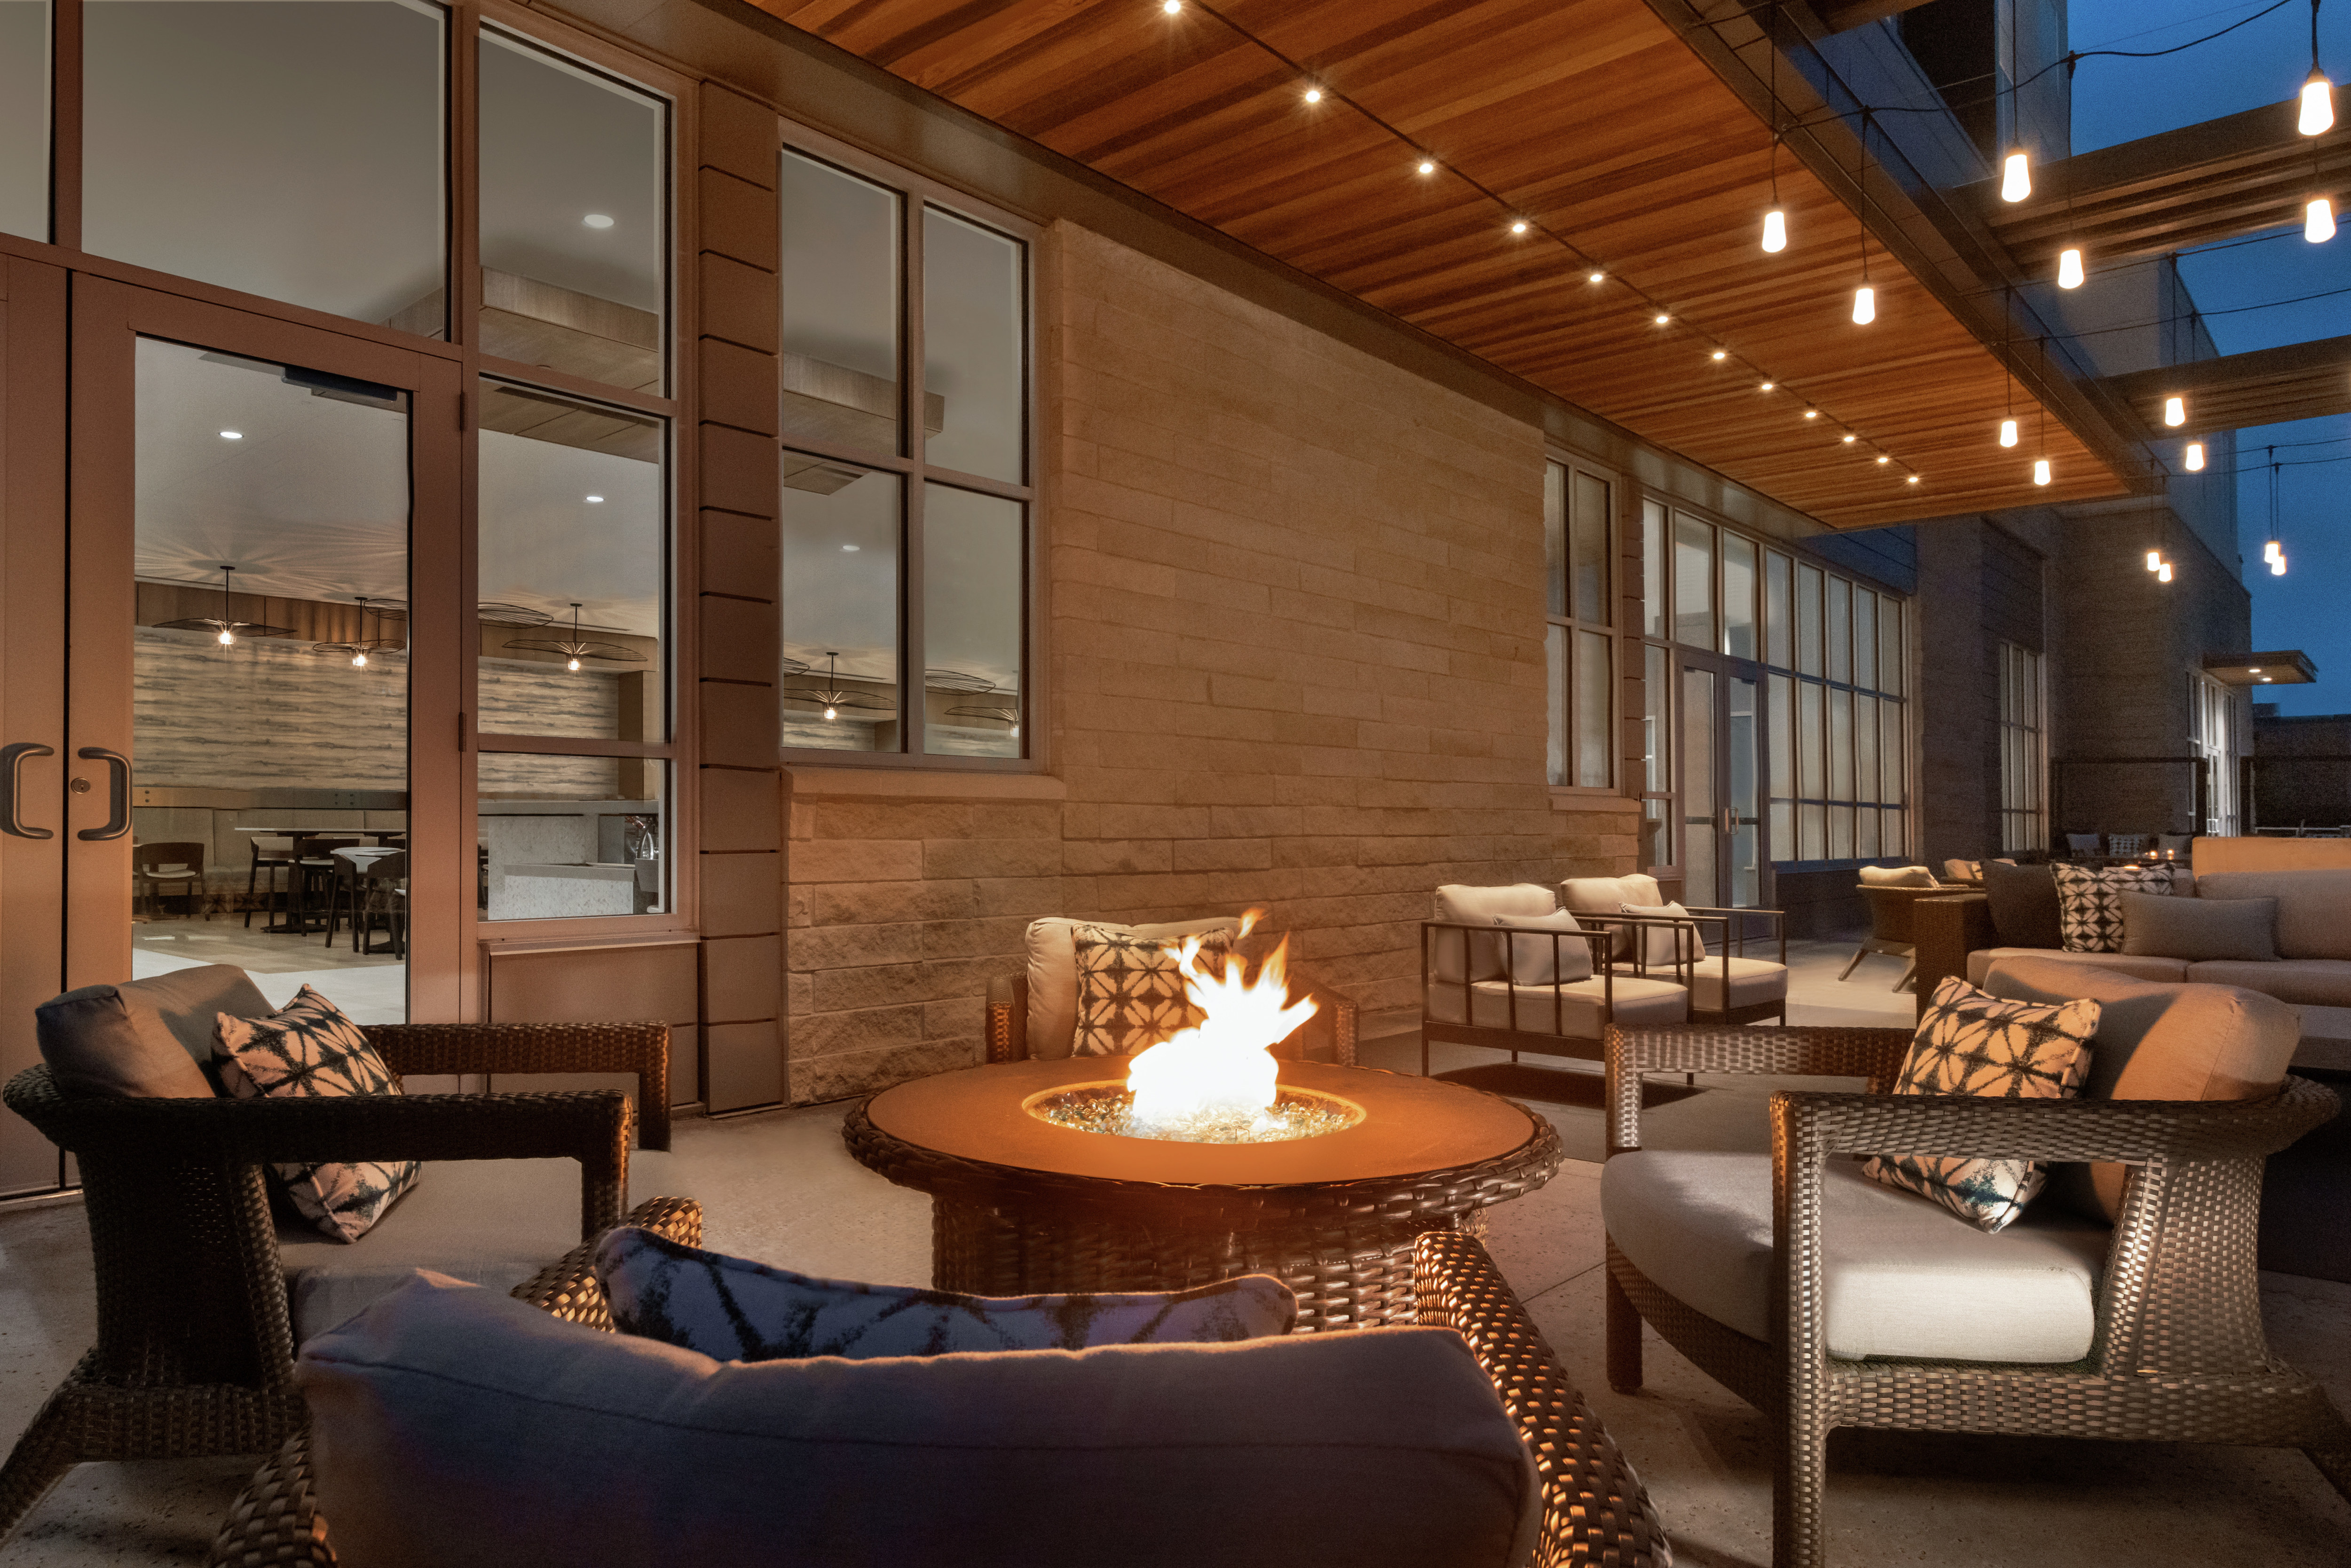 Beautiful outdoor patio in the evening featuring comfortable seating, string lights, and firepit.